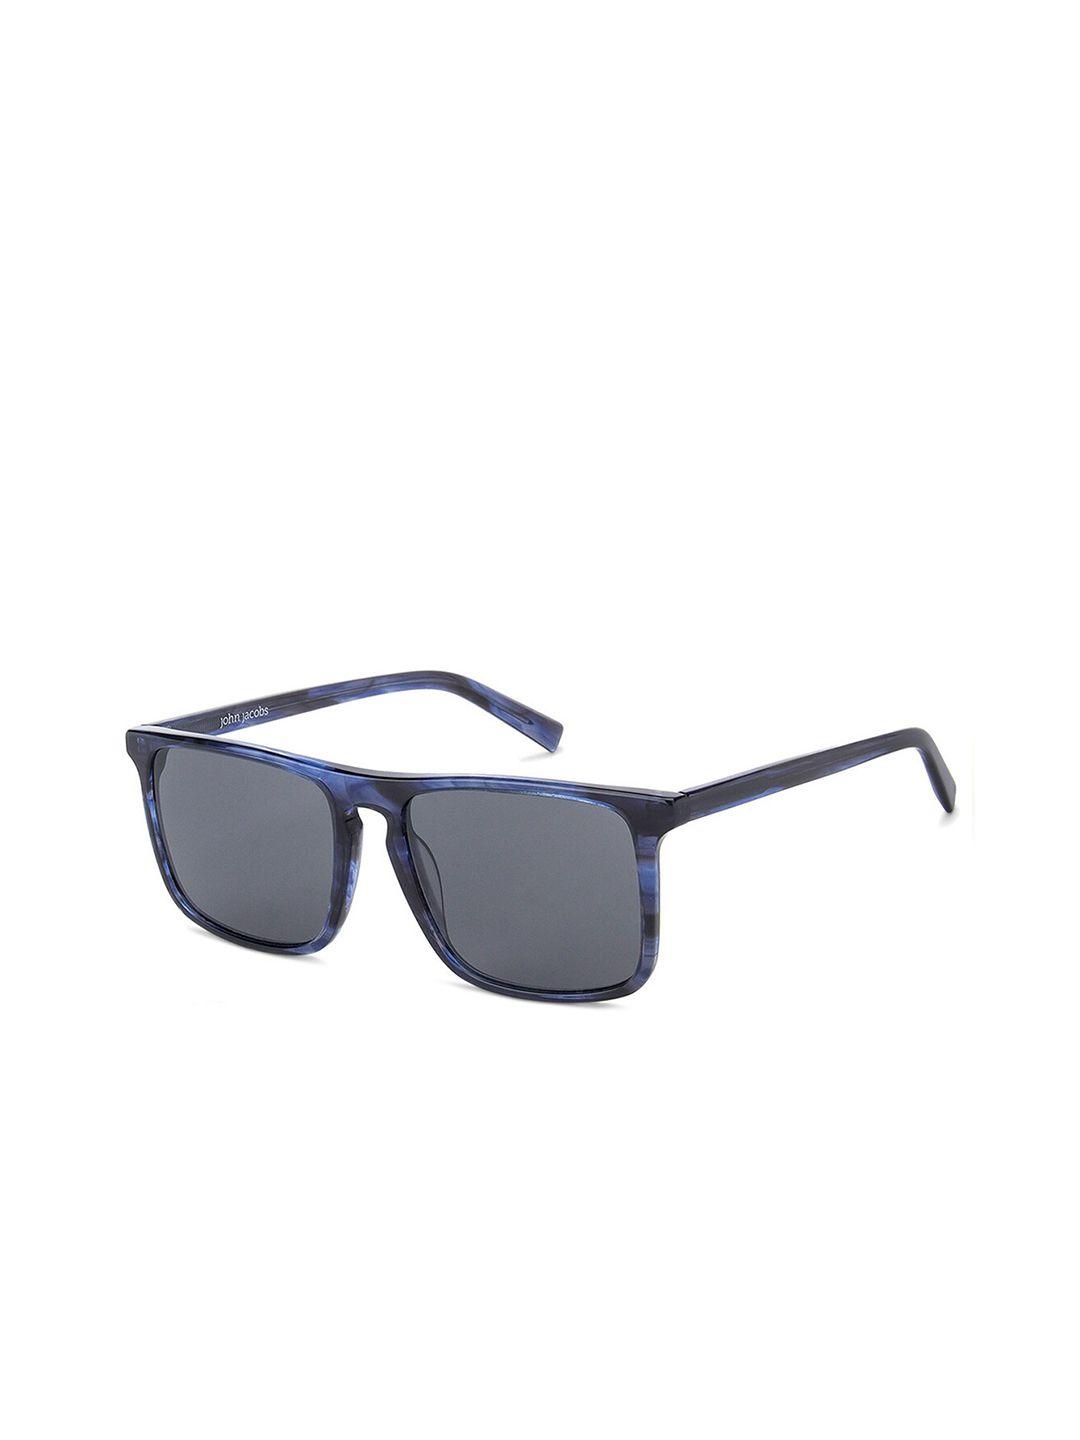 john jacobs unisex grey lens & blue rectangle sunglasses with uv protected lens 140635